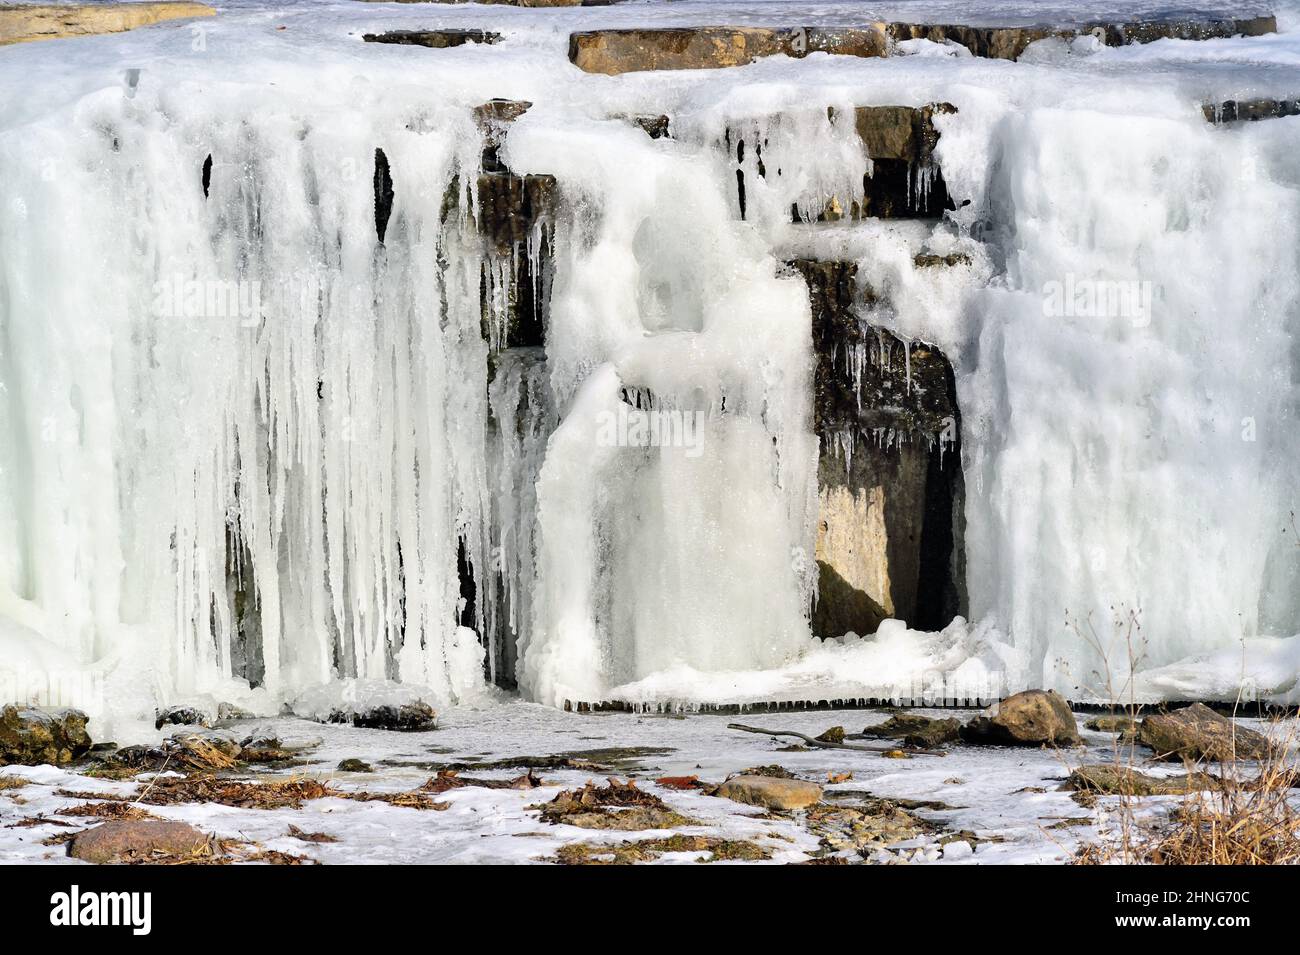 St. Charles, Illinois, USA. A waterfall in creek formed by continuous below freezing temperatures. Stock Photo